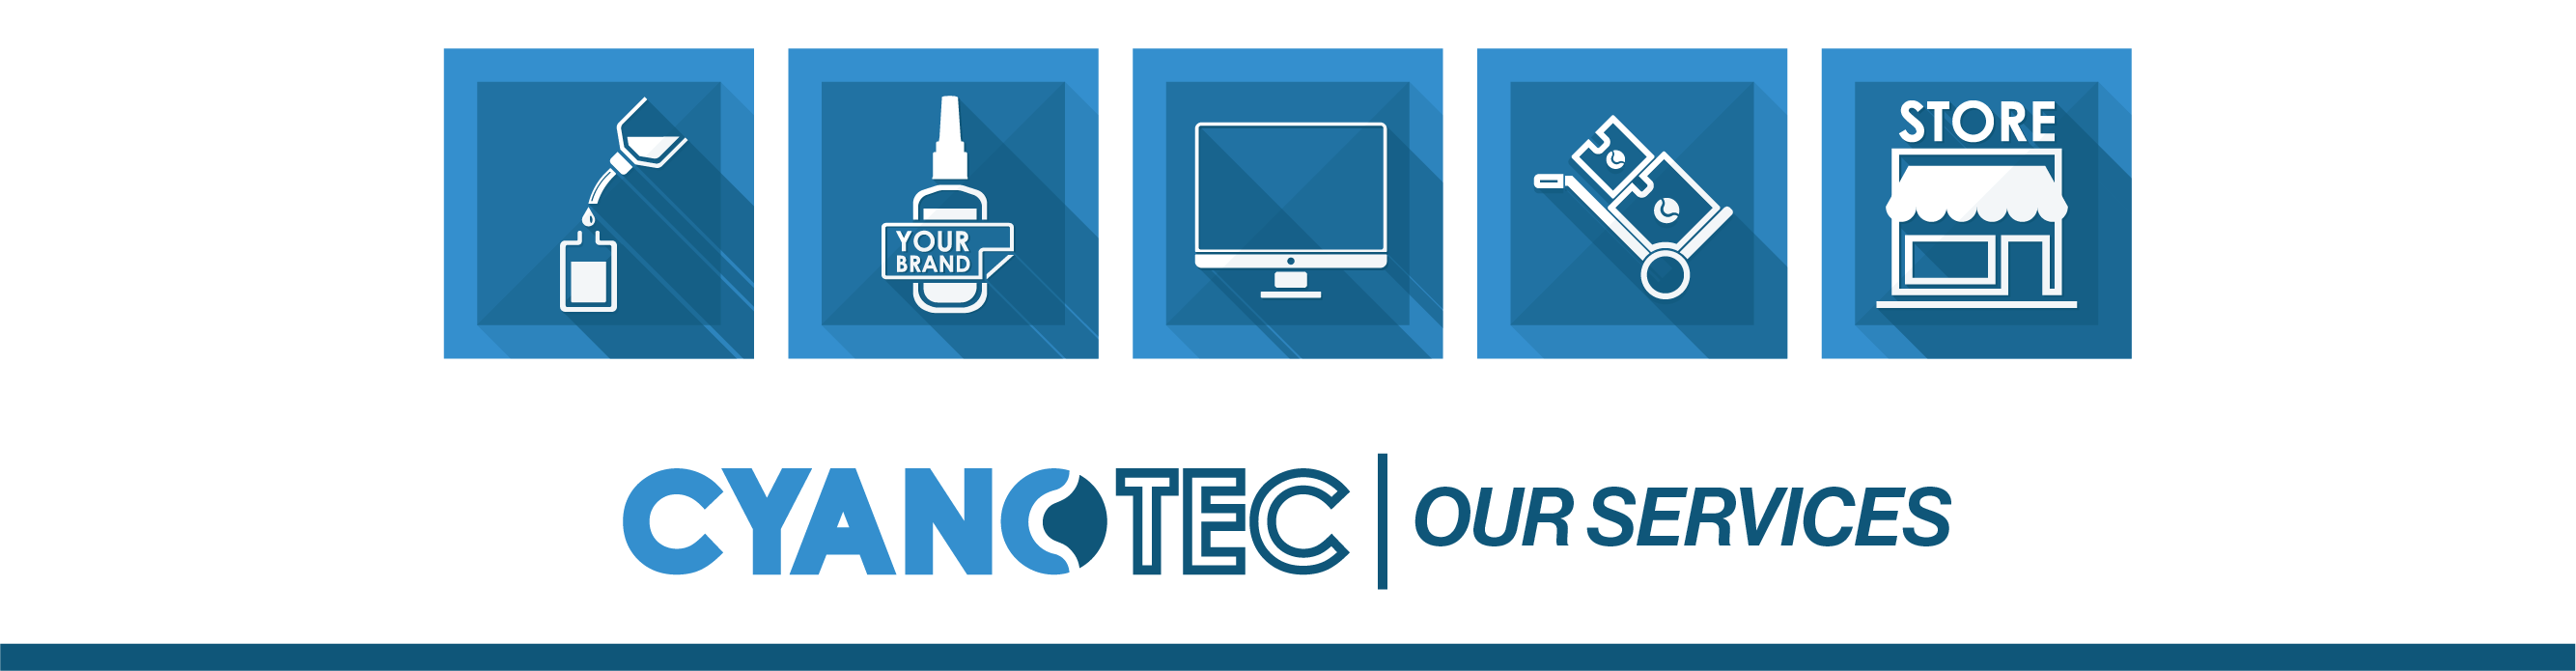 Cyanotec | Our Services - Banner Image with Service Icons.